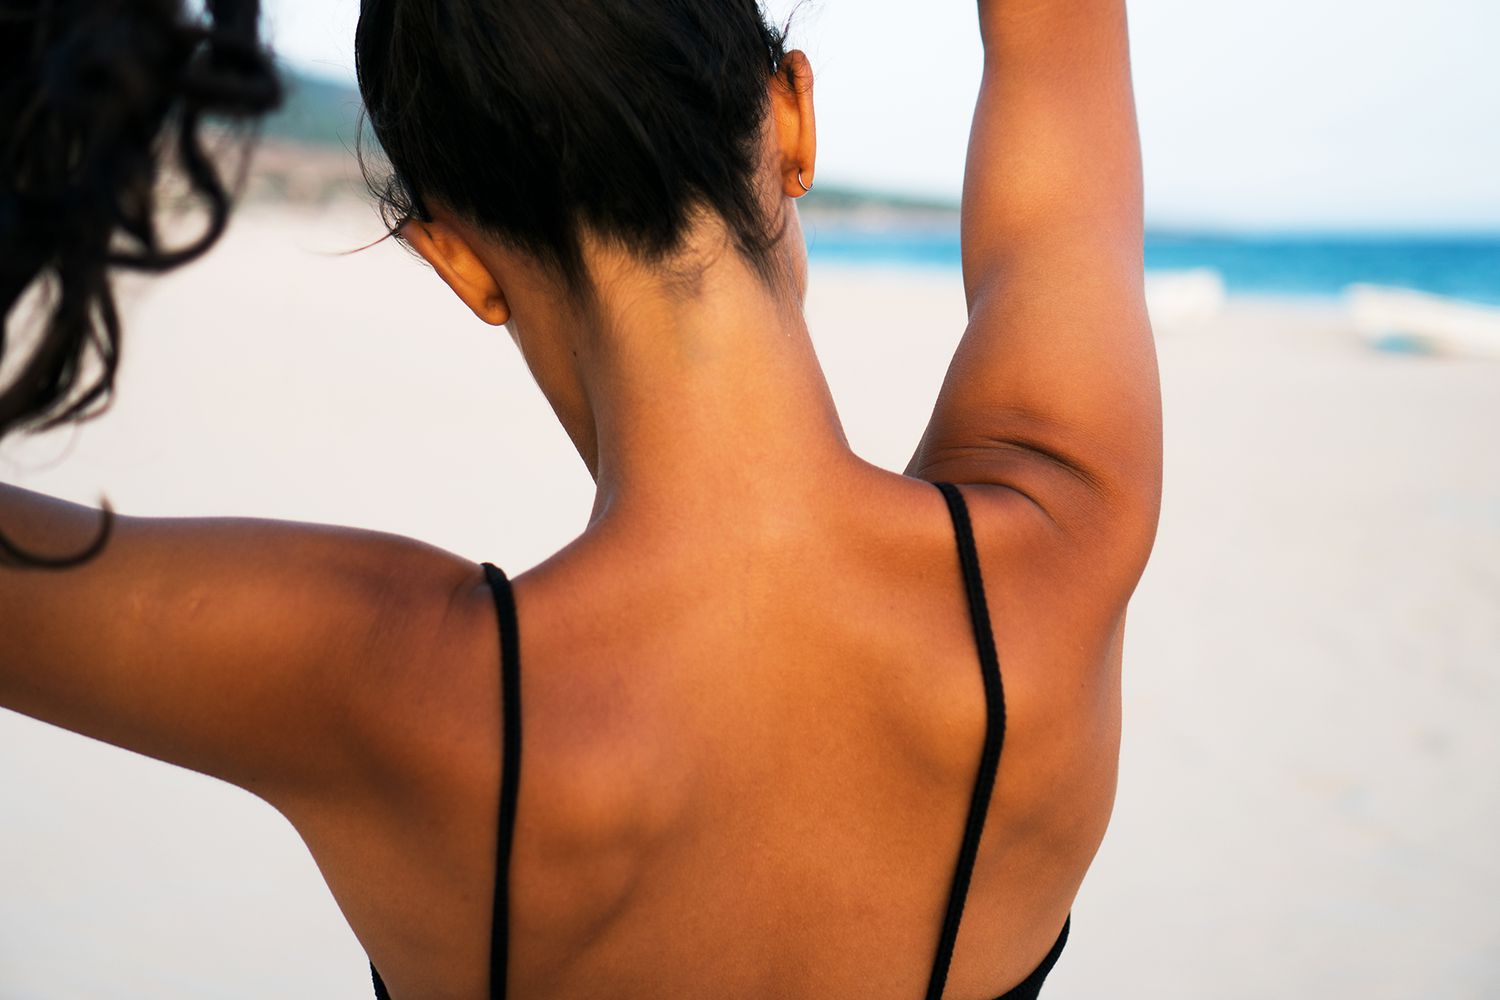 back and shoulders of a woman walking on the beach